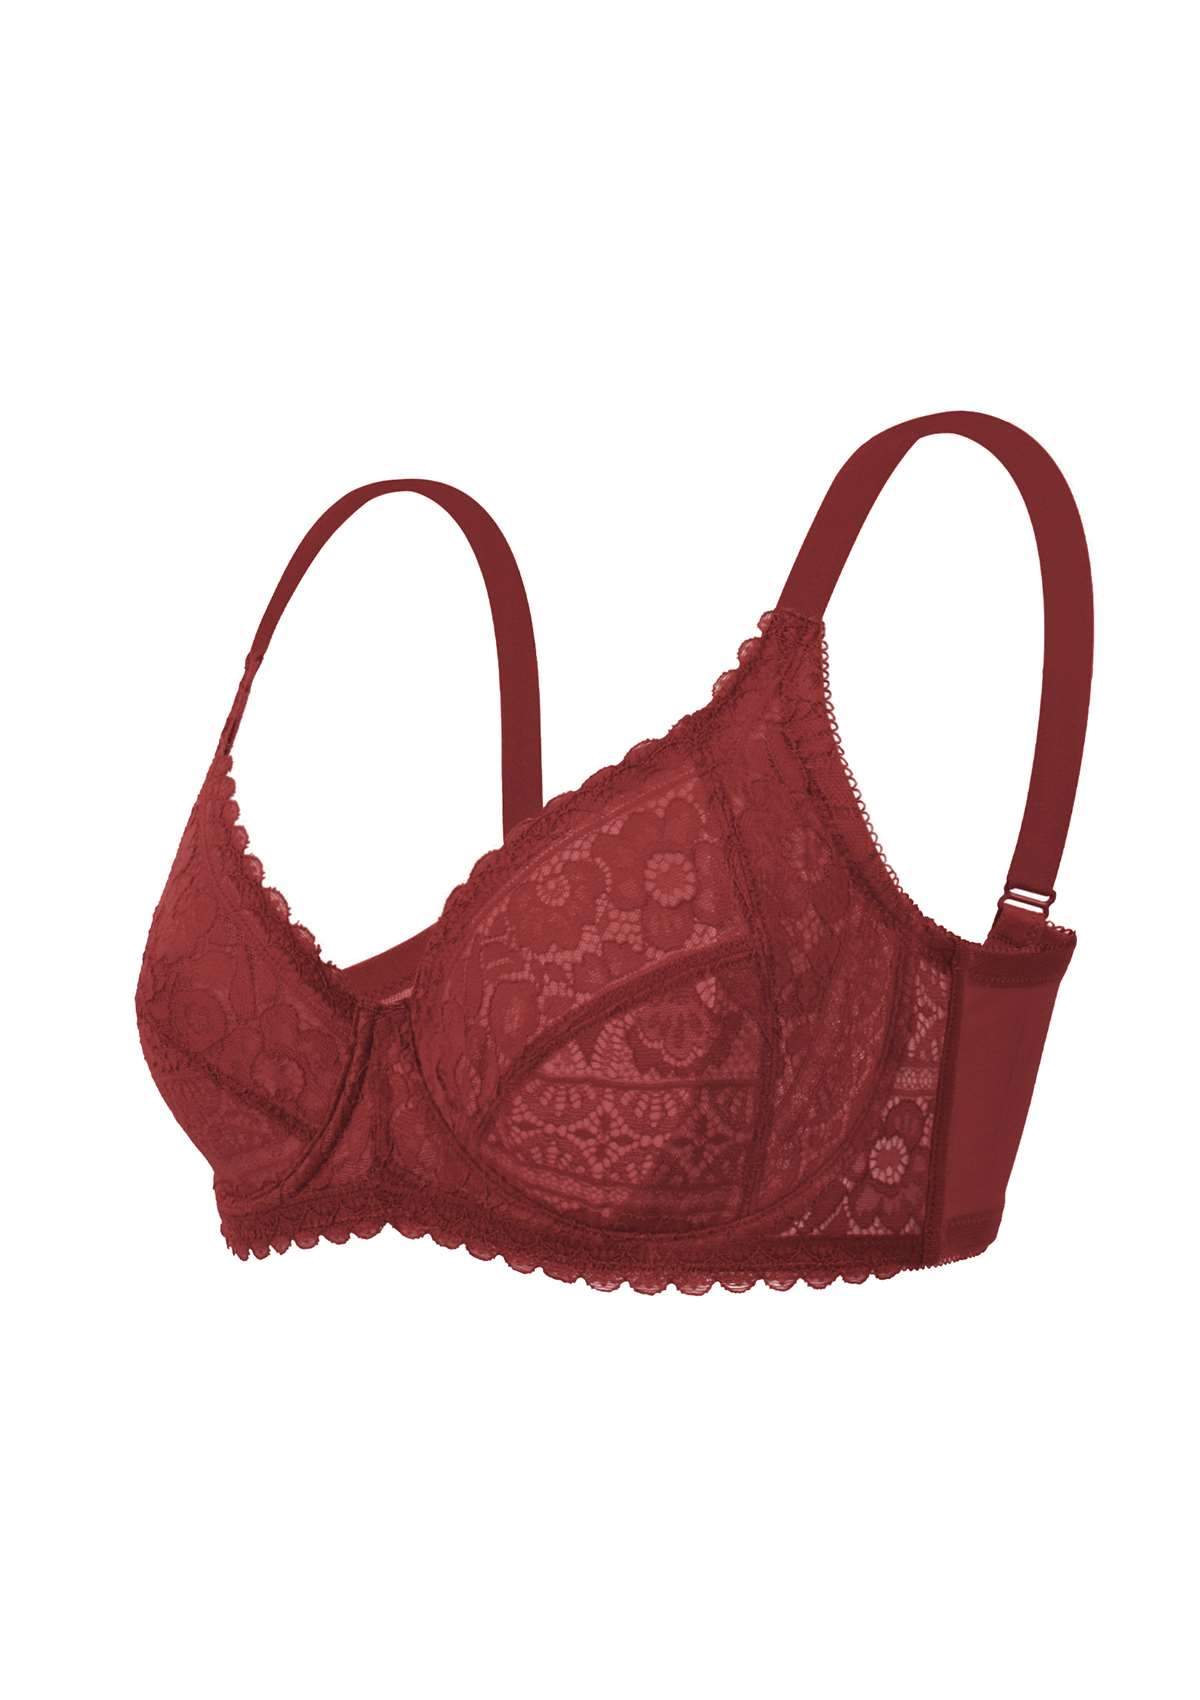 HSIA Freesia Unlined Lace Bra: Bra That Supports Back - Red / 40 / C